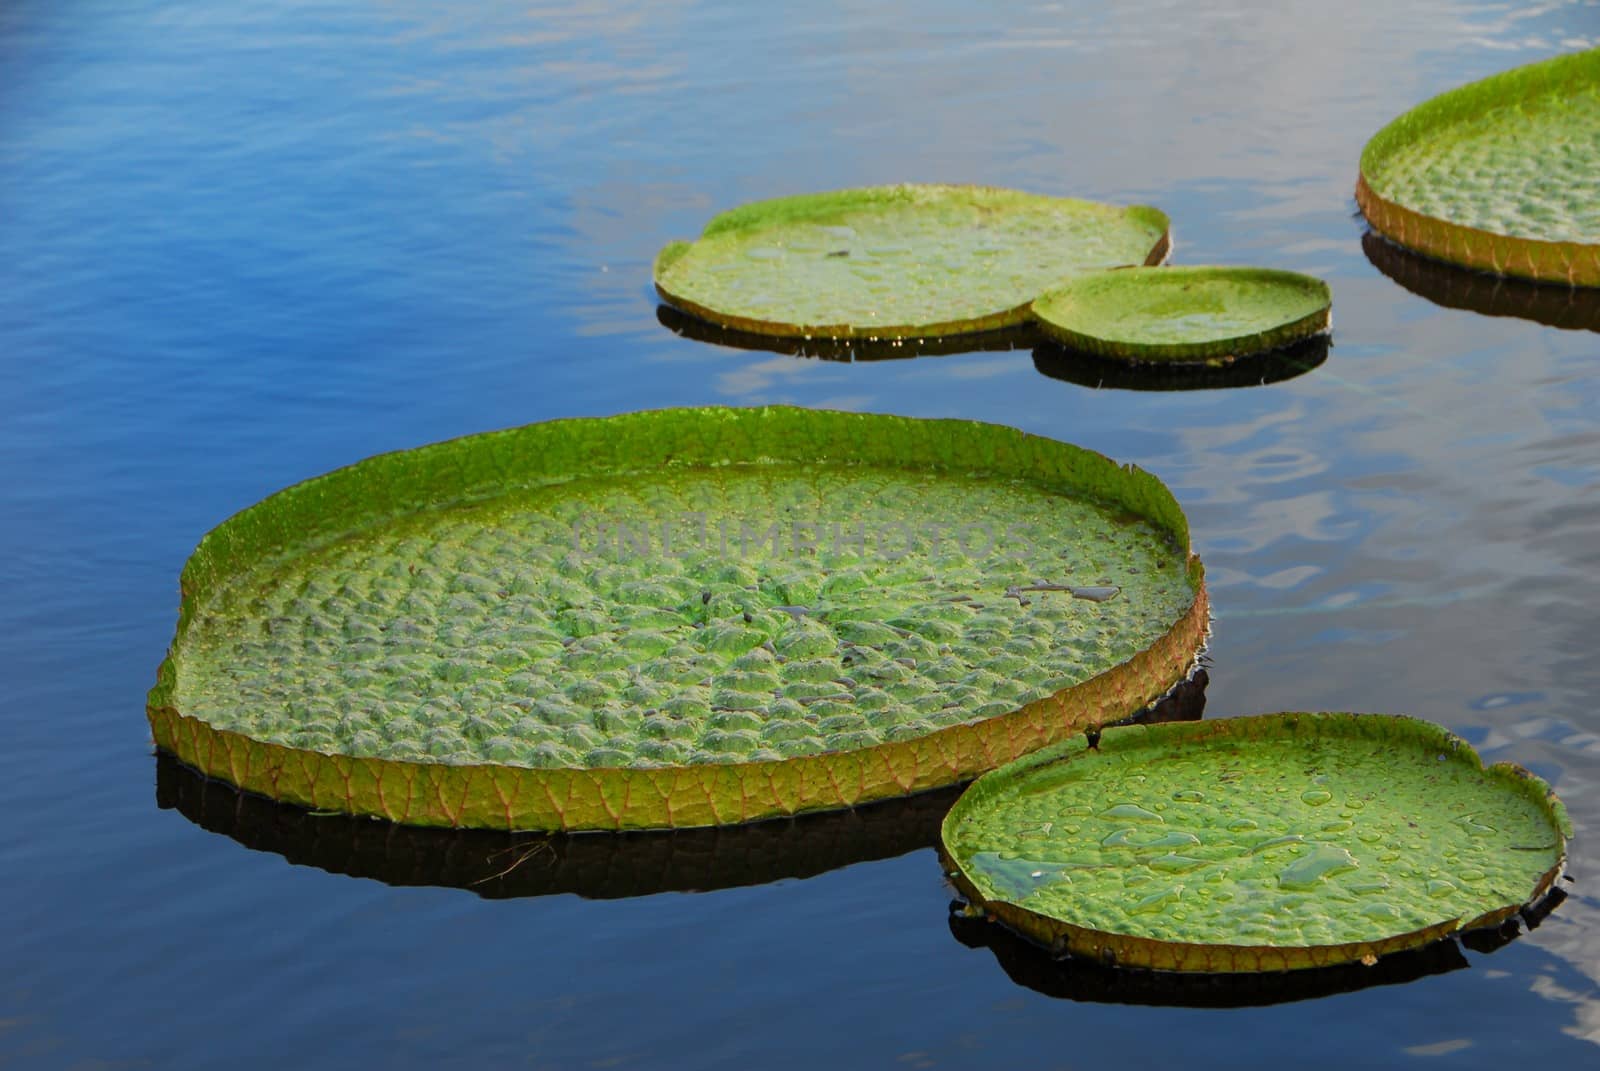 green disc shape water lily leaves in water